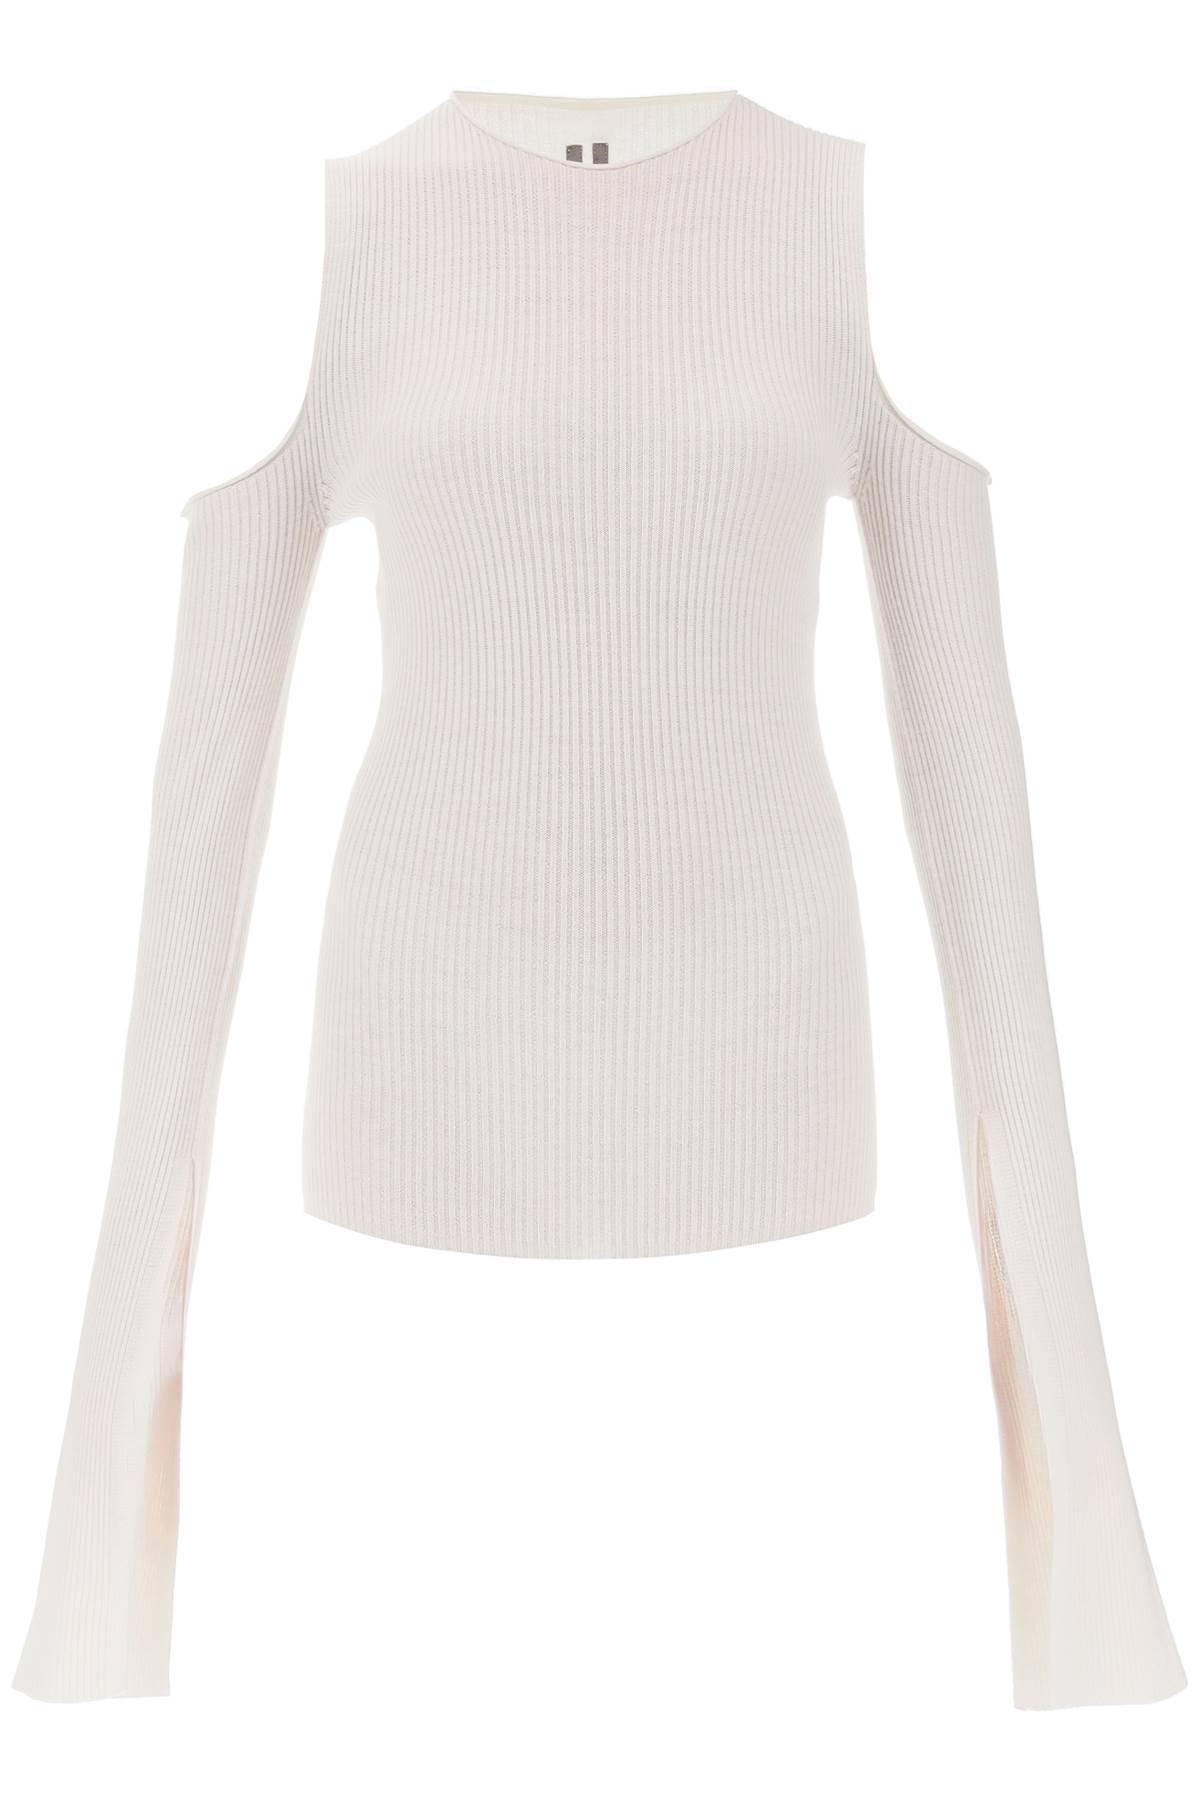 Rick Owens RICK OWENS sweater with cut-out shoulders